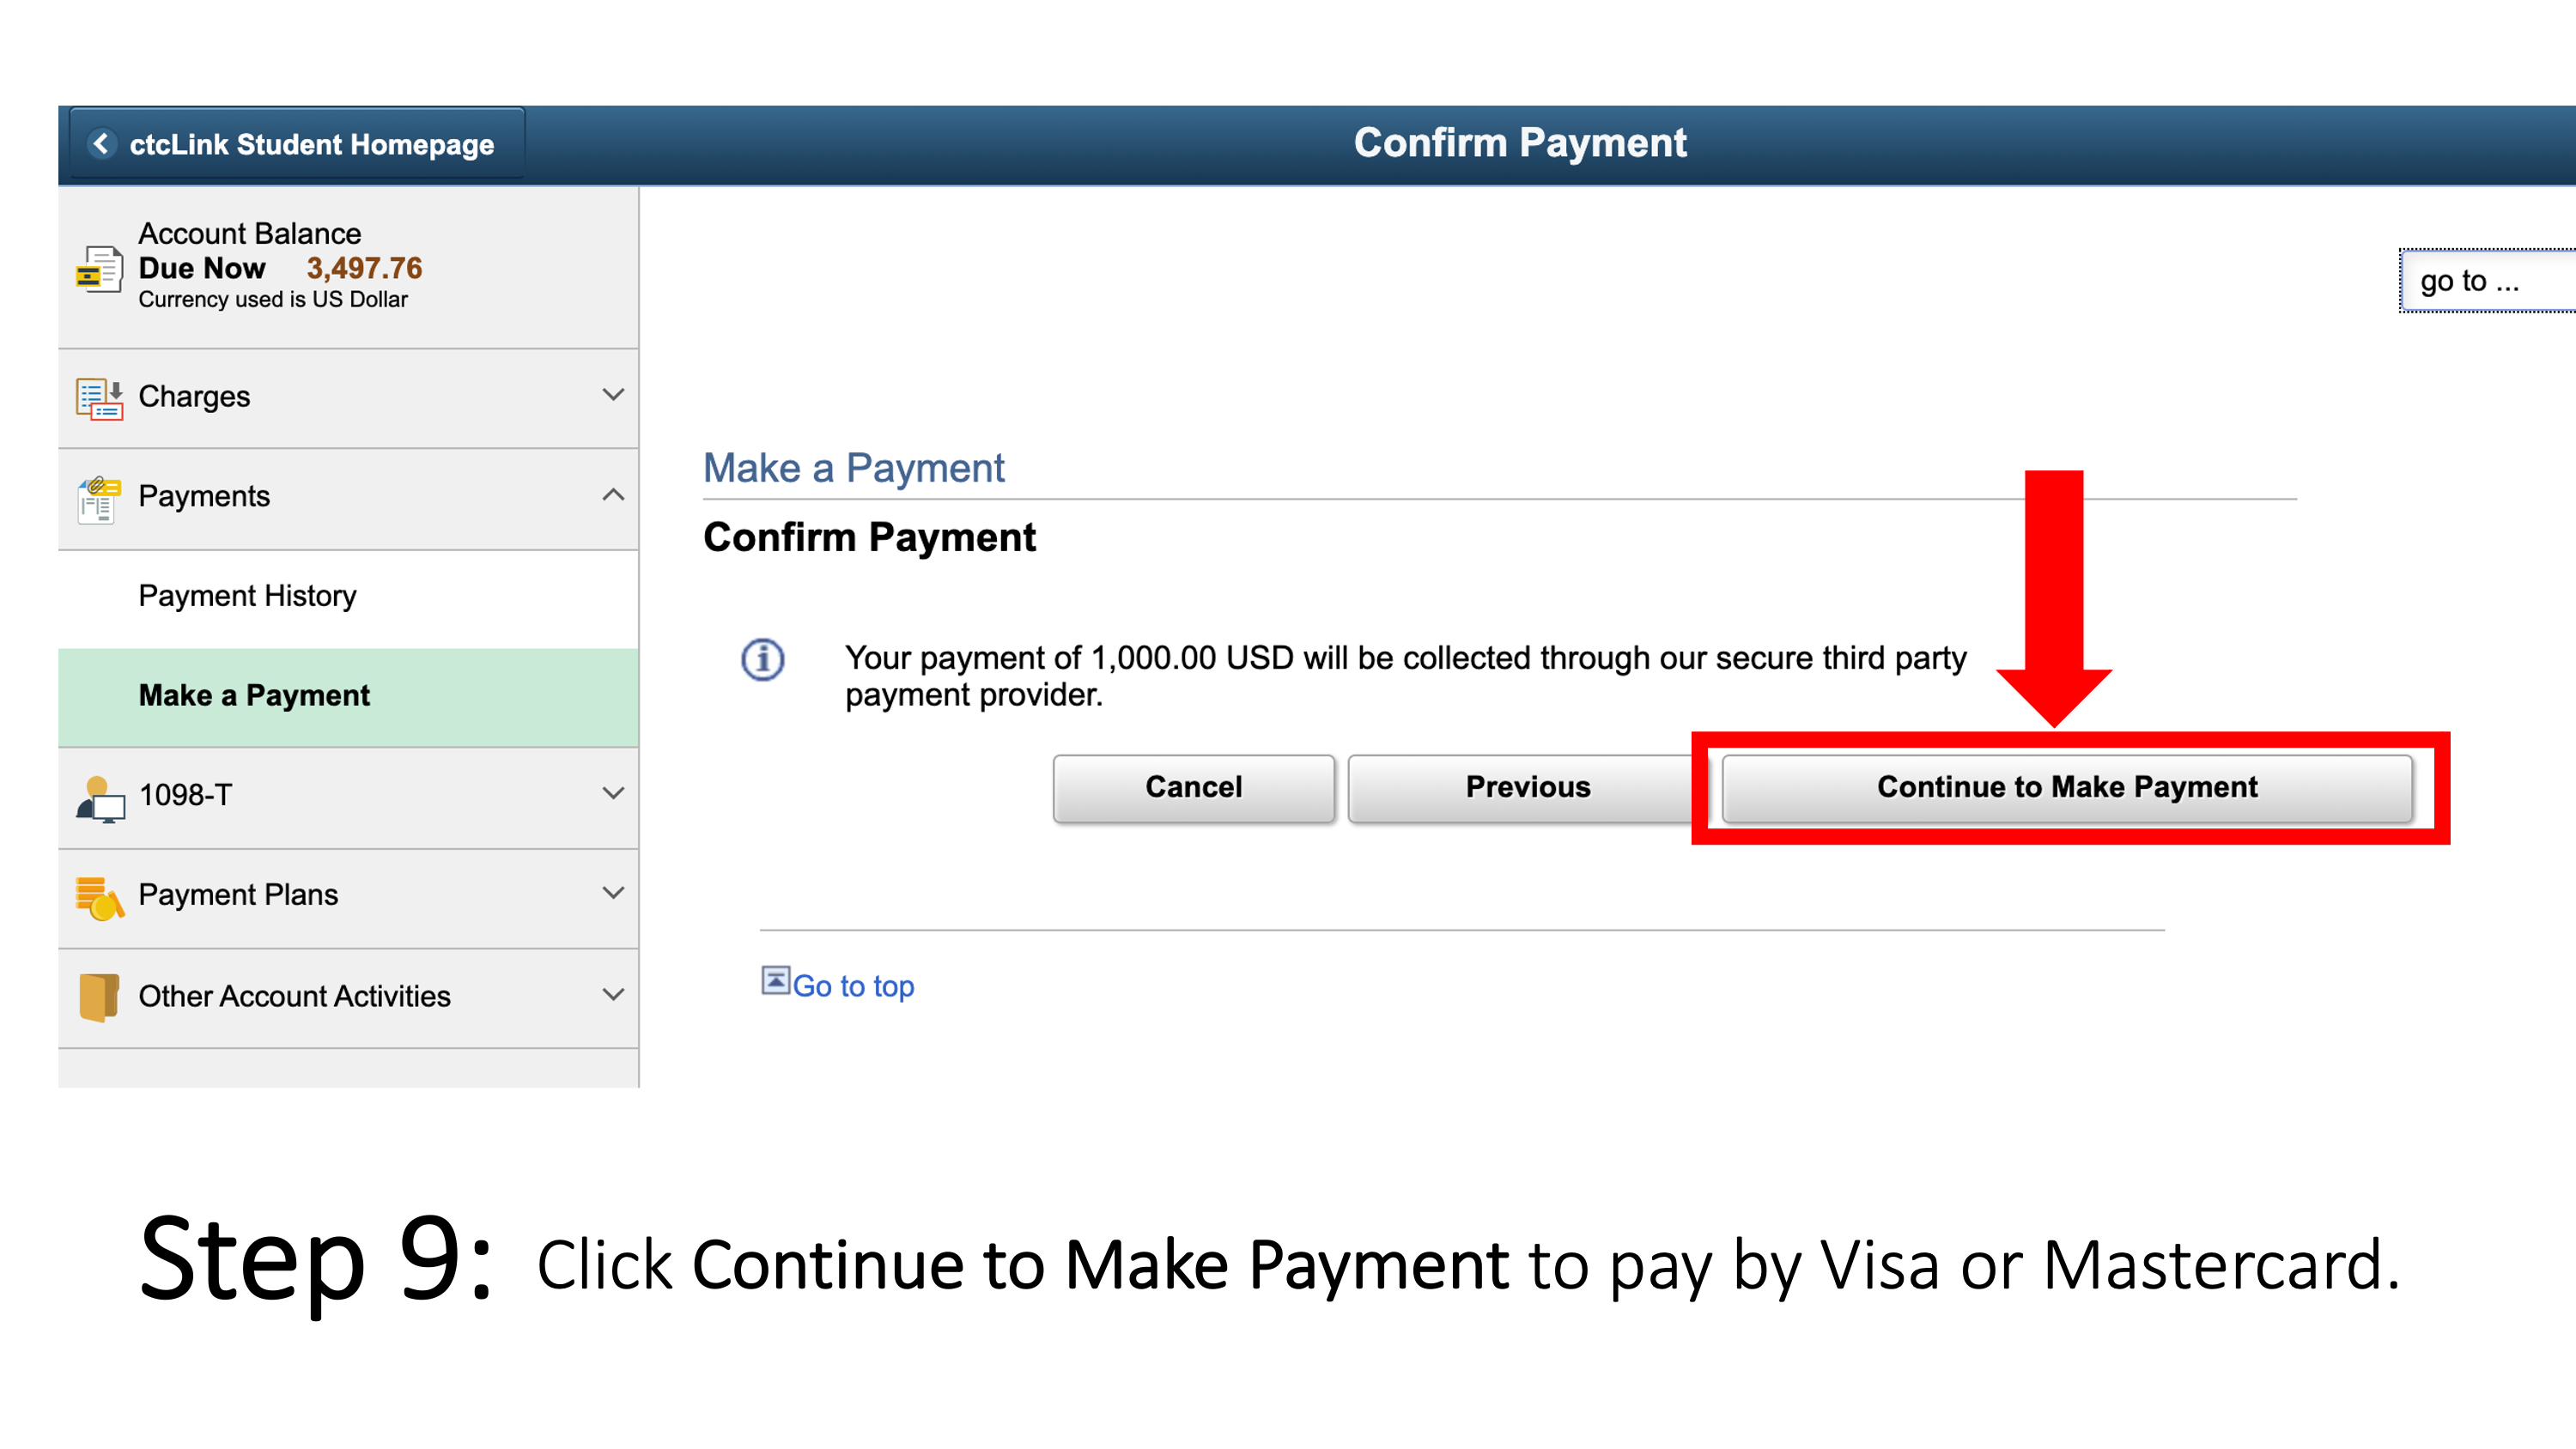 Click Continue to Make Payment to pay by Visa or Mastercard.